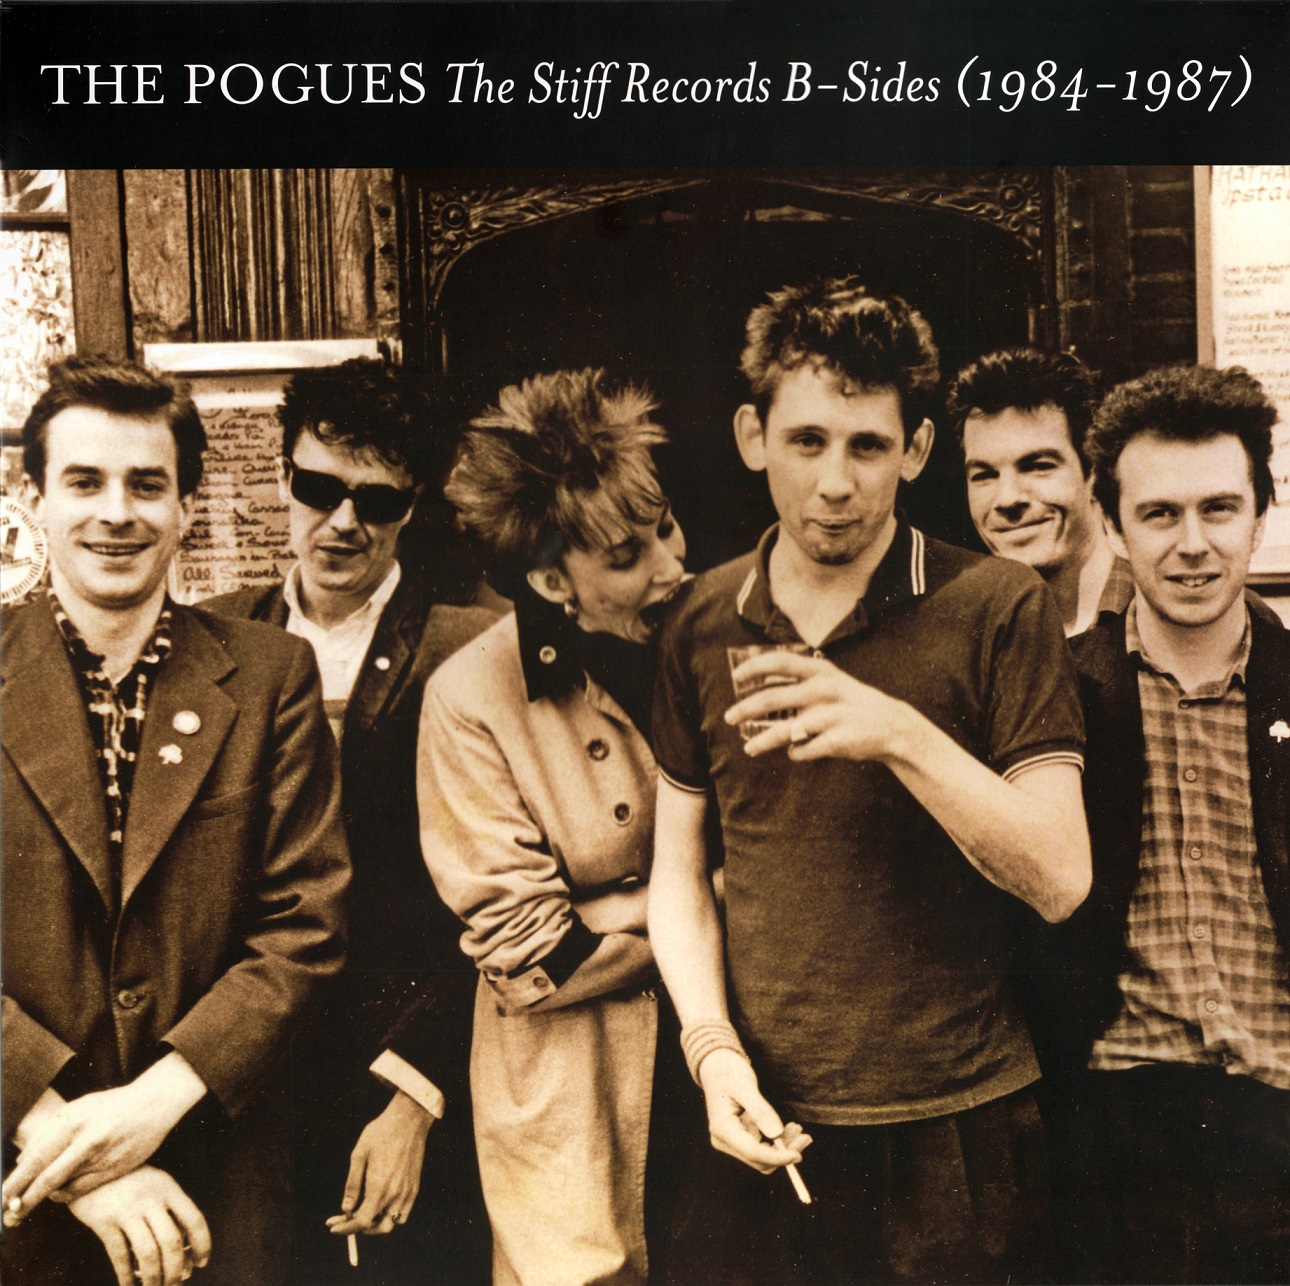 The Pogues - 2023 - The Stiff Records - B-Sides (1984-1987) (24-192 Vinyl)